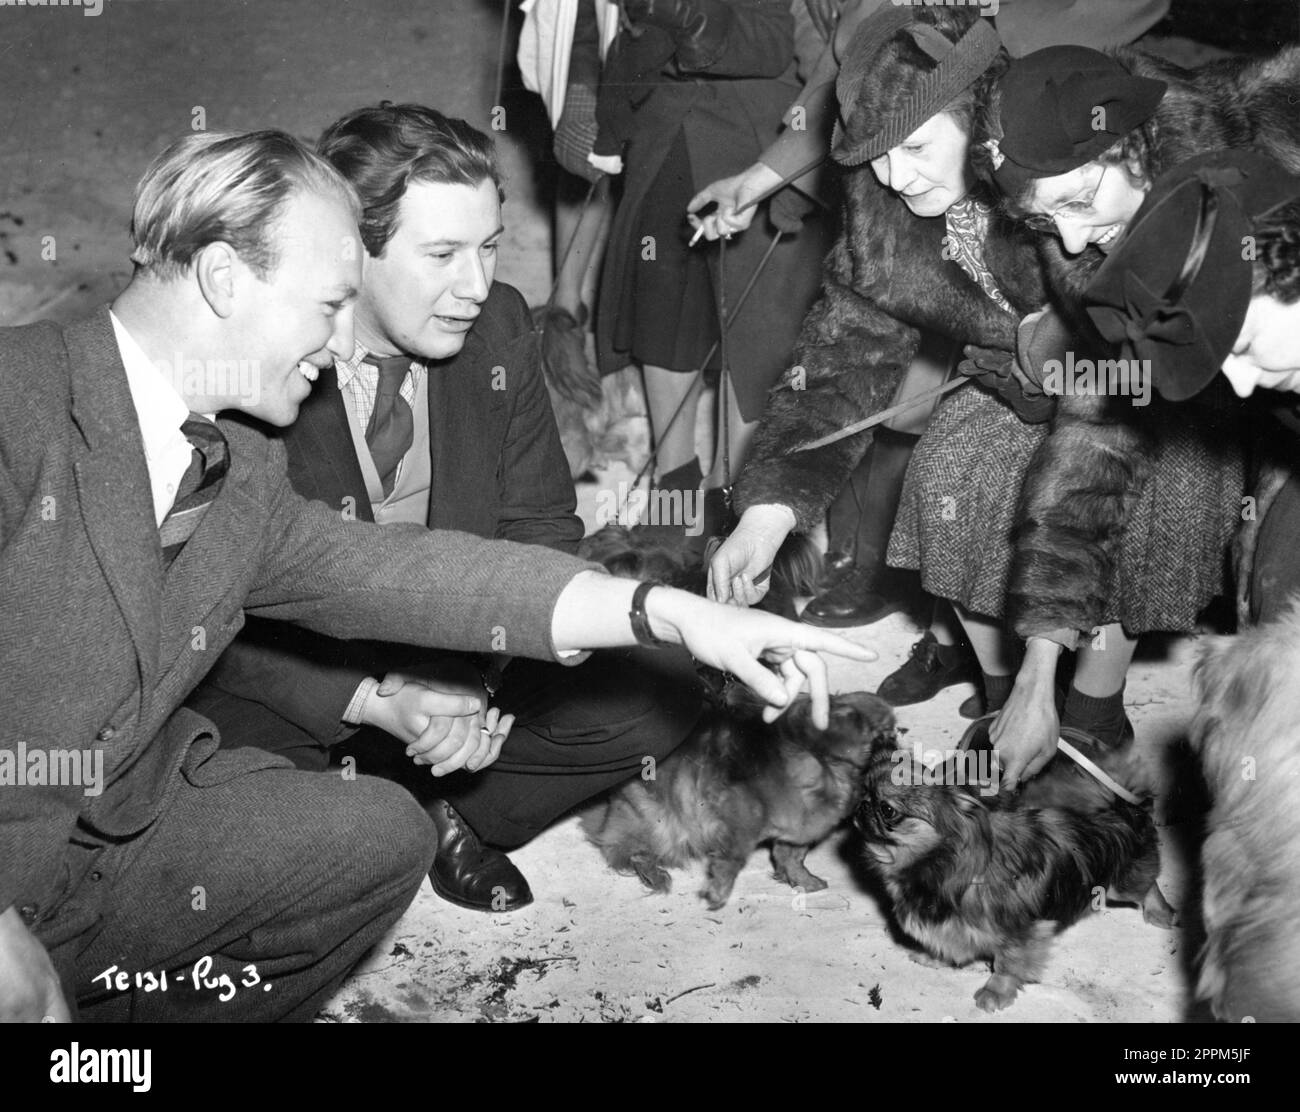 Co-Producer GEORGE BROWN and Producer / Director PETER USTINOV on set candid selecting a Pekingese Dog for an important role in their film VICE VERSA 1948 director / screenplay PETER USTINOV novel F. Anstey George H. Brown Productions for Two Cities Films / General Film Distributors (GFD) Stock Photo